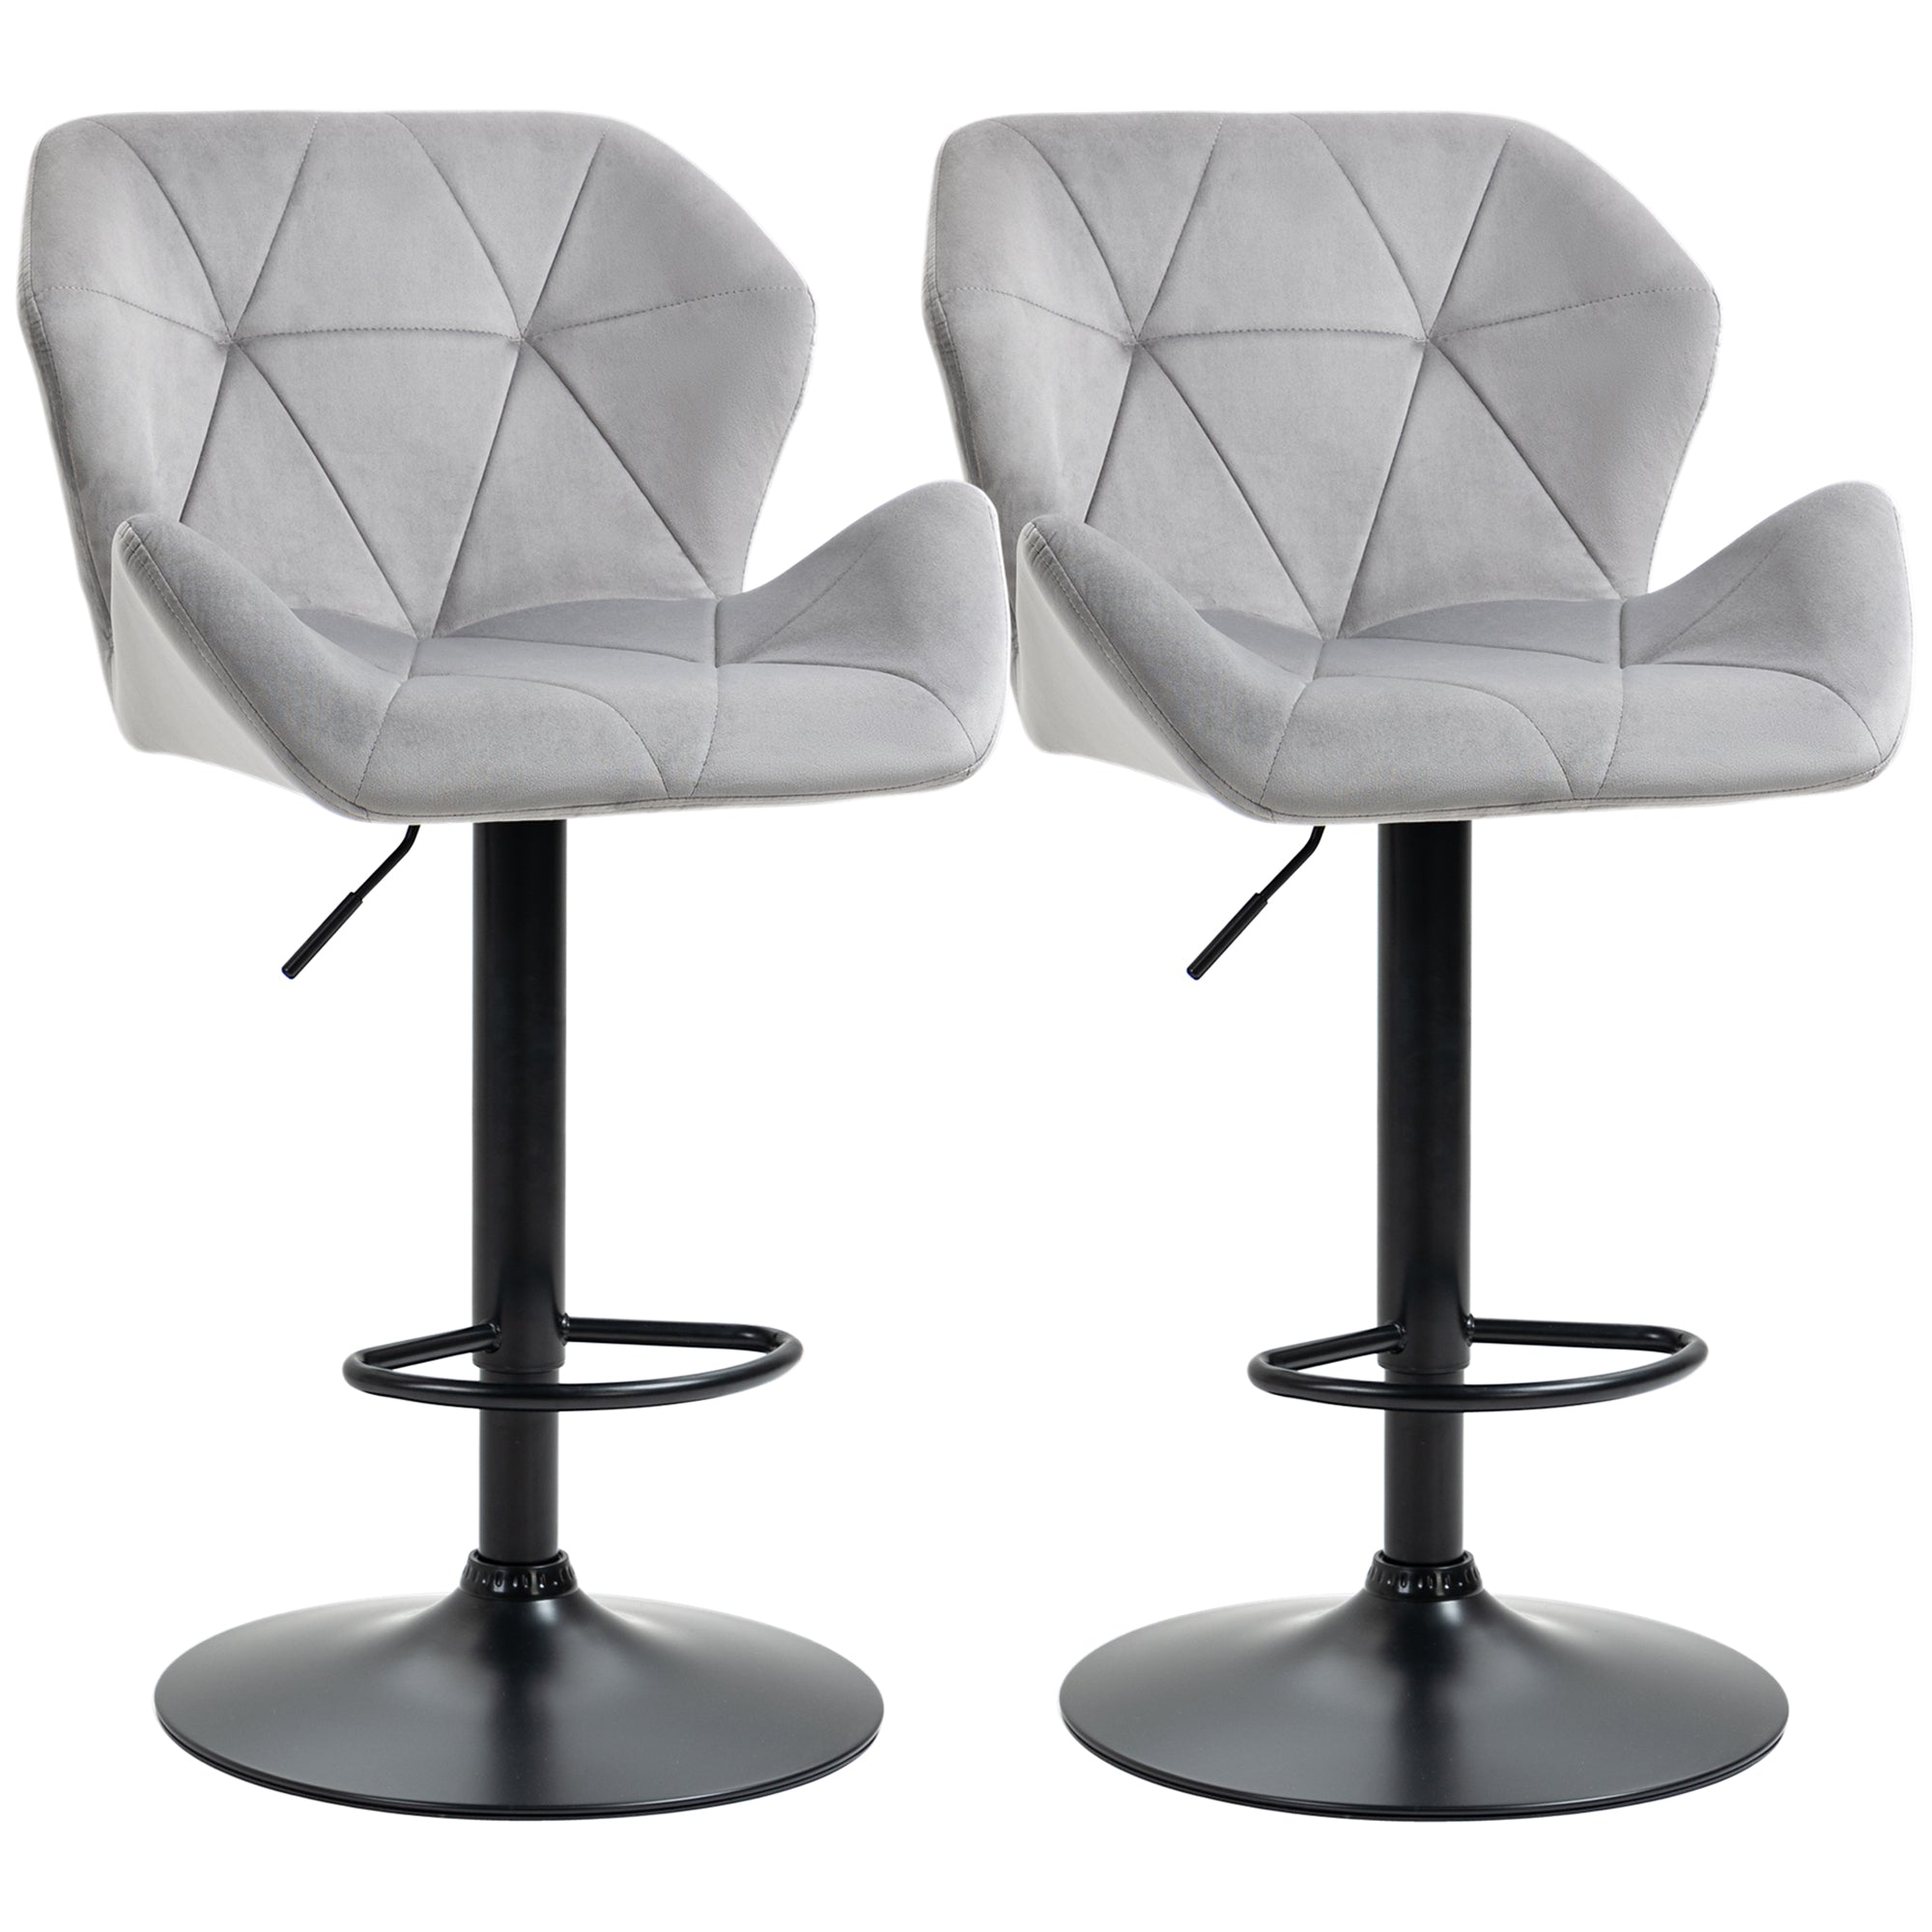 Set Of 2 Bar stools With Backs , Velvet-Touch Barstools w/ Metal Frame Footrest Triangle Indenting Moulded Seat Adjustable Height Swivel Grey  AOSOM   